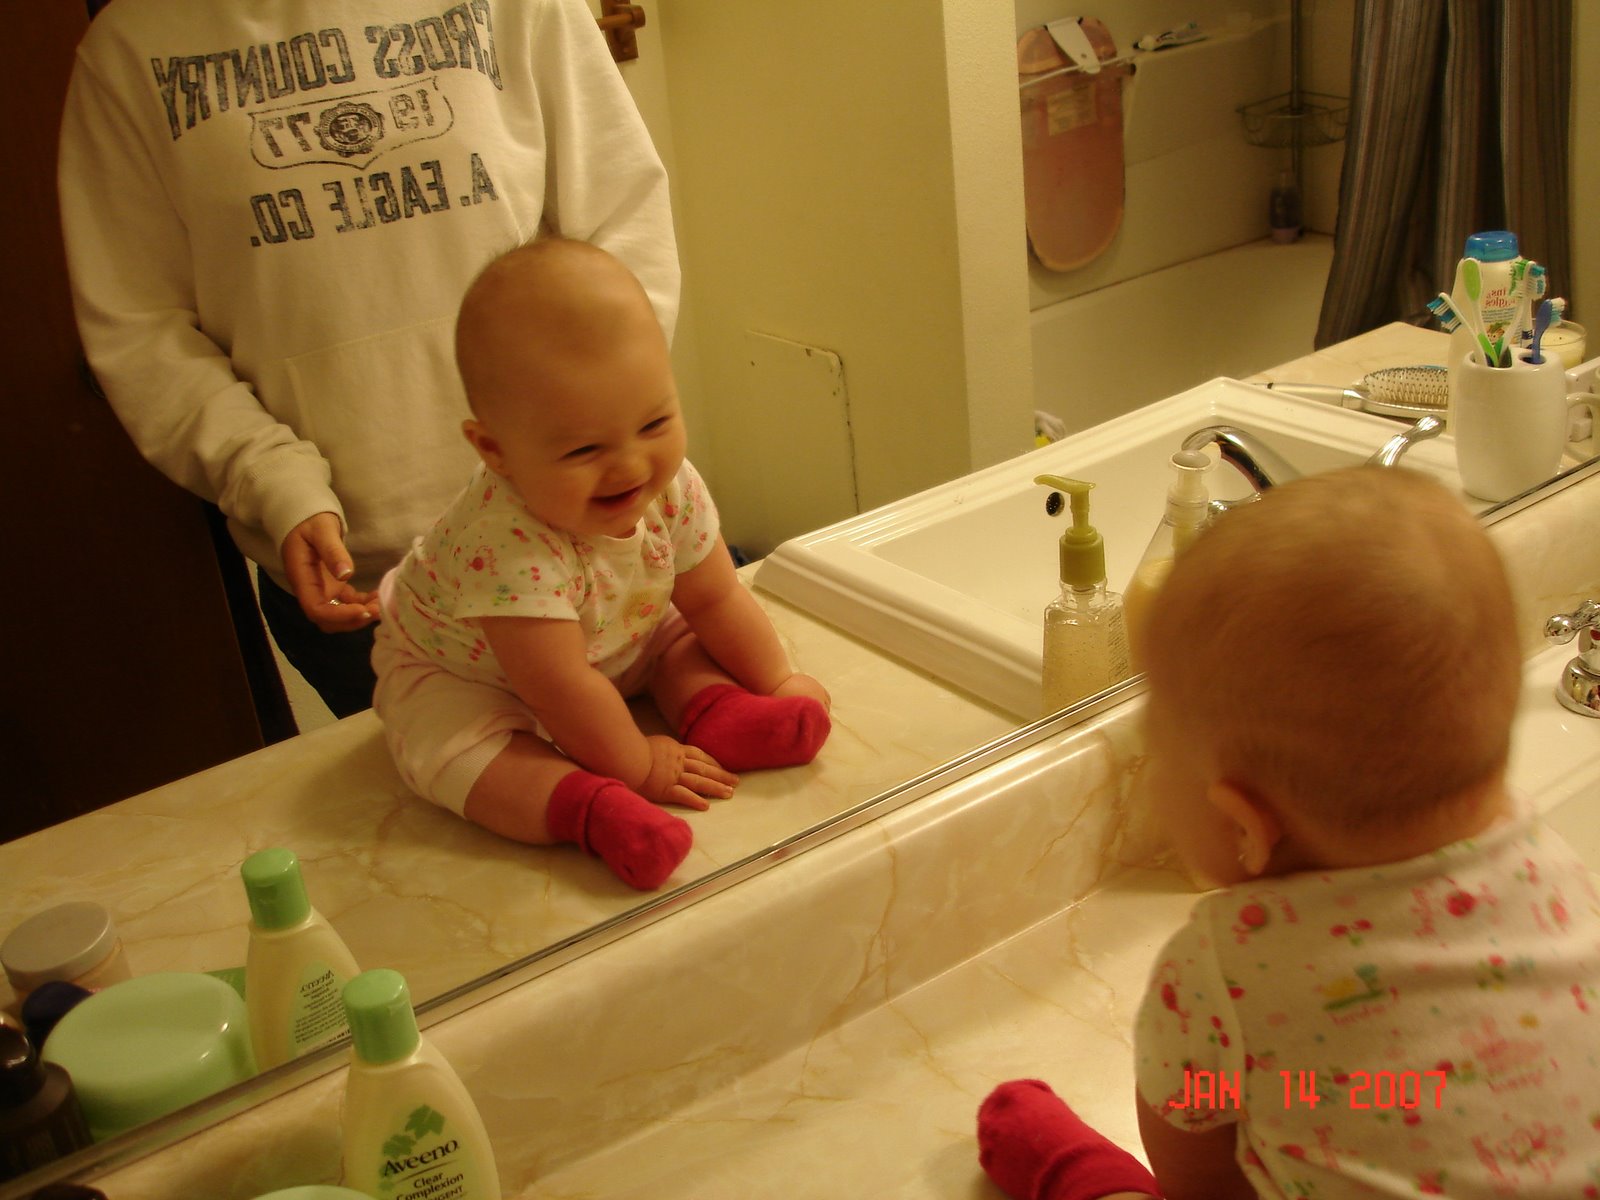 [Who+is+that+happy+baby+in+the+mirror.JPG]